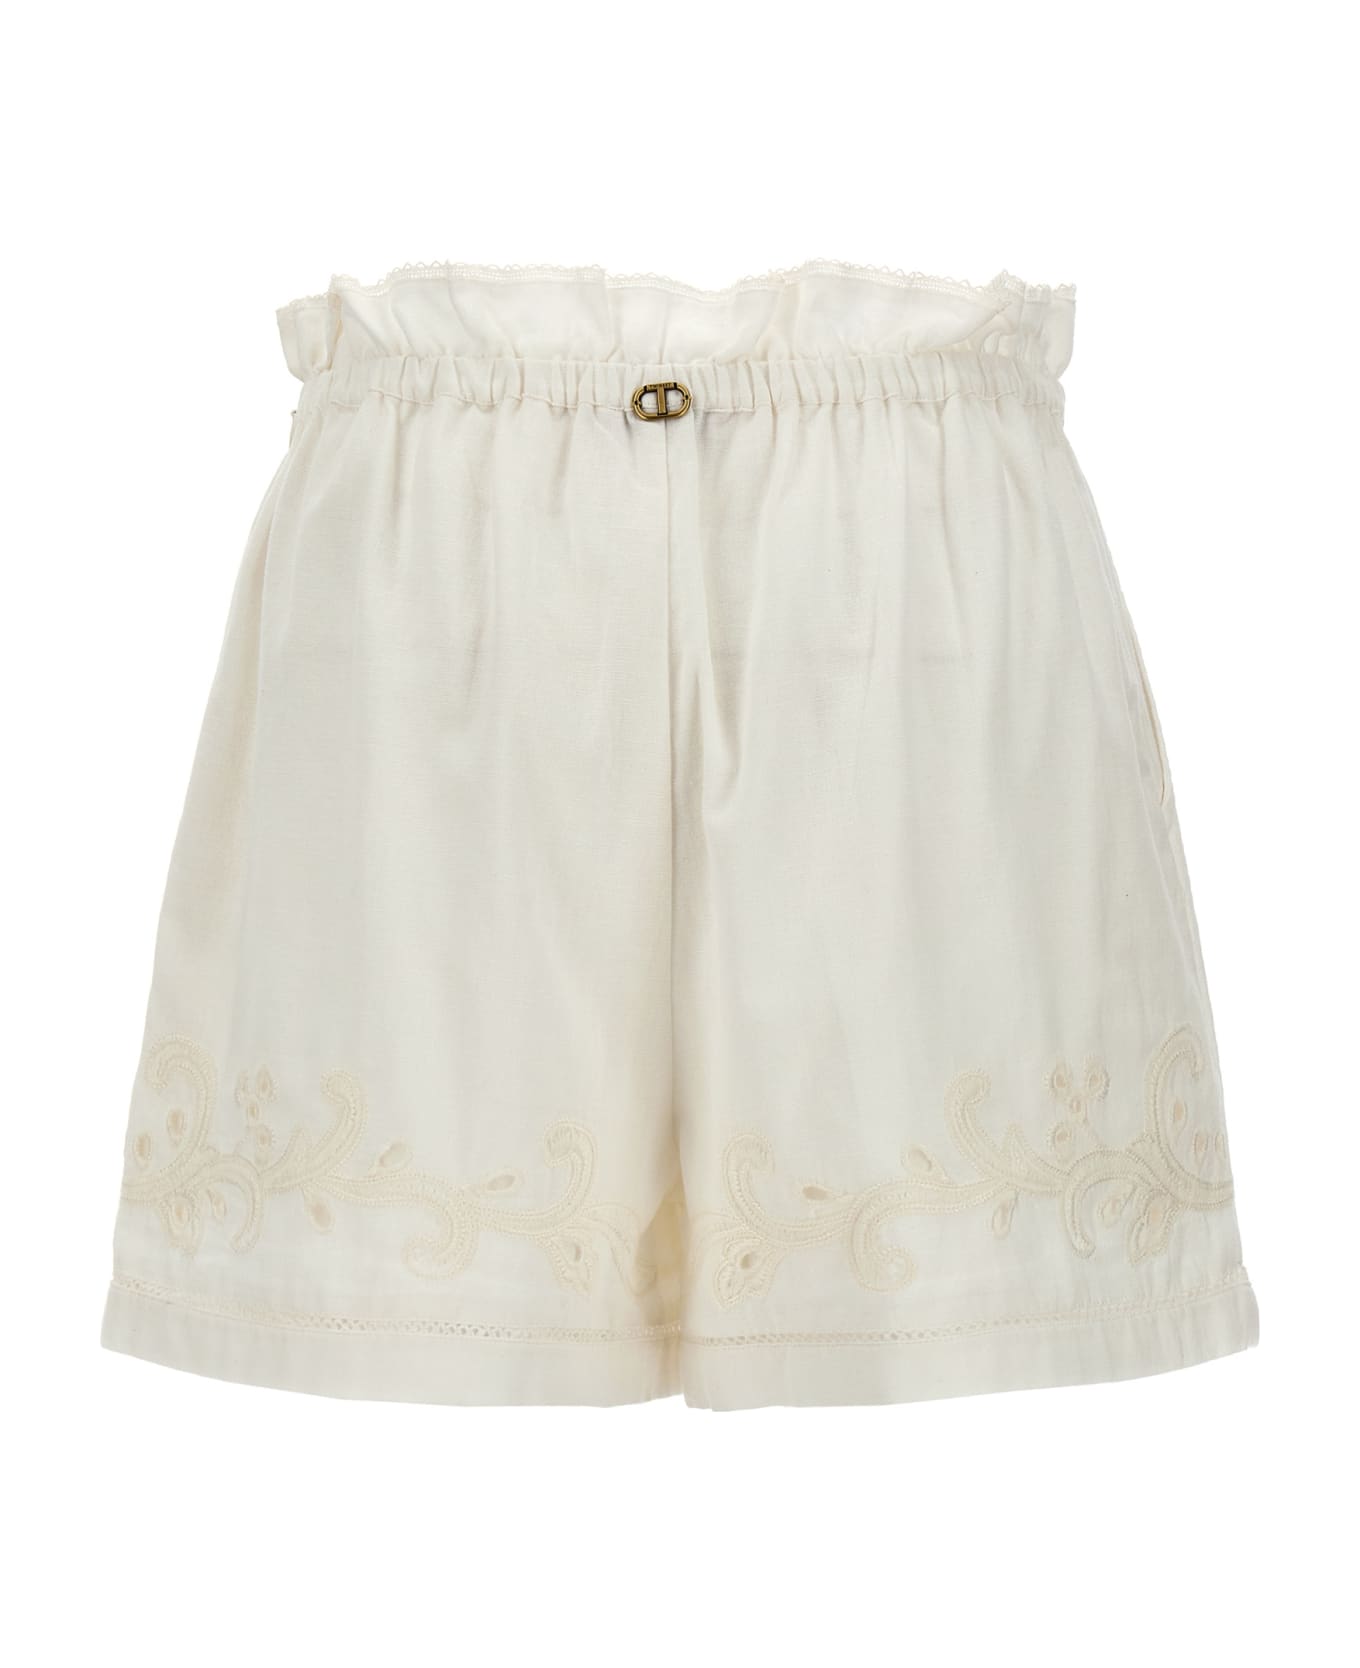 TwinSet Embroidered Shorts - White ショートパンツ